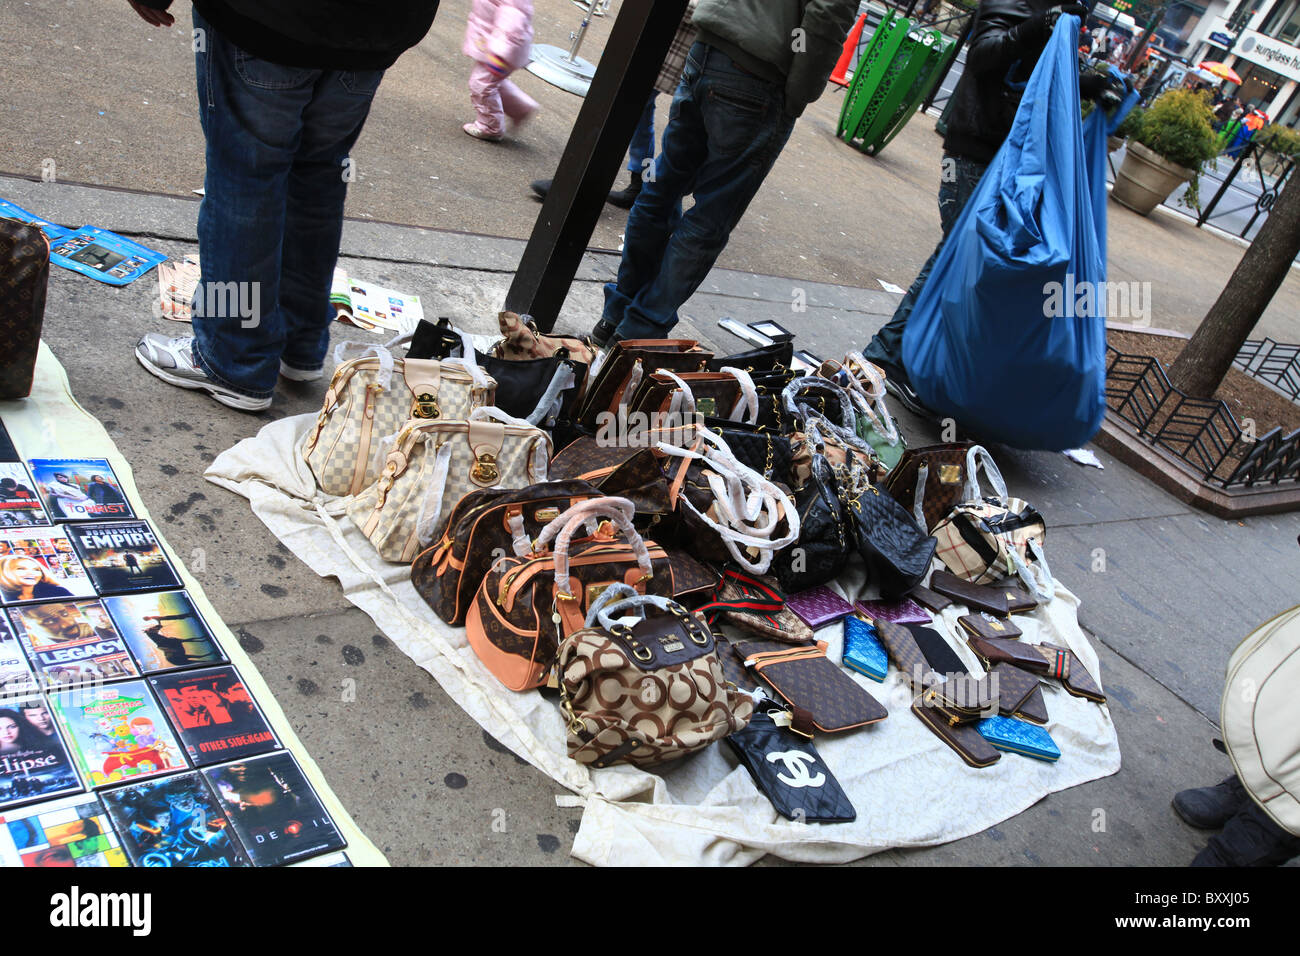 Designer bags hi-res stock photography and images - Alamy